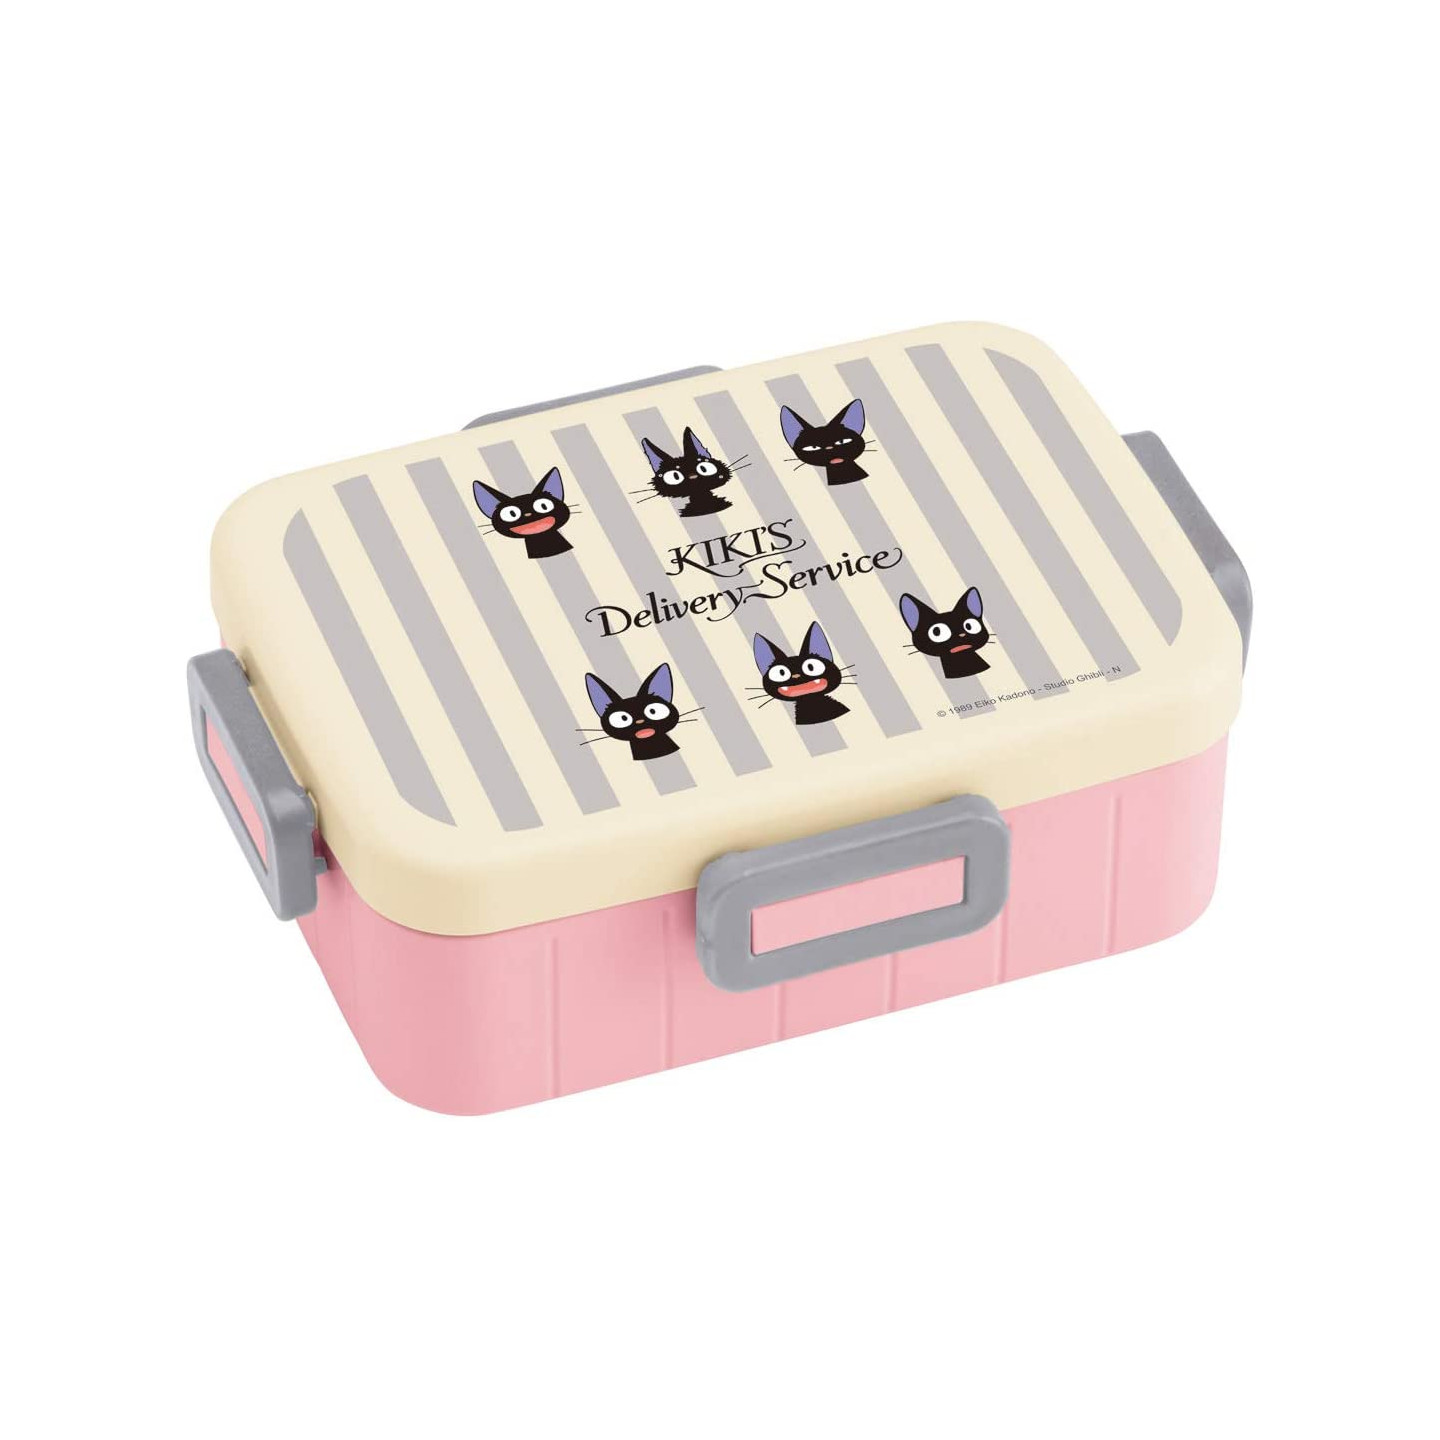 Skater Stainless Steel Thermal Lunch Box Set - Kiki's Delivery Service